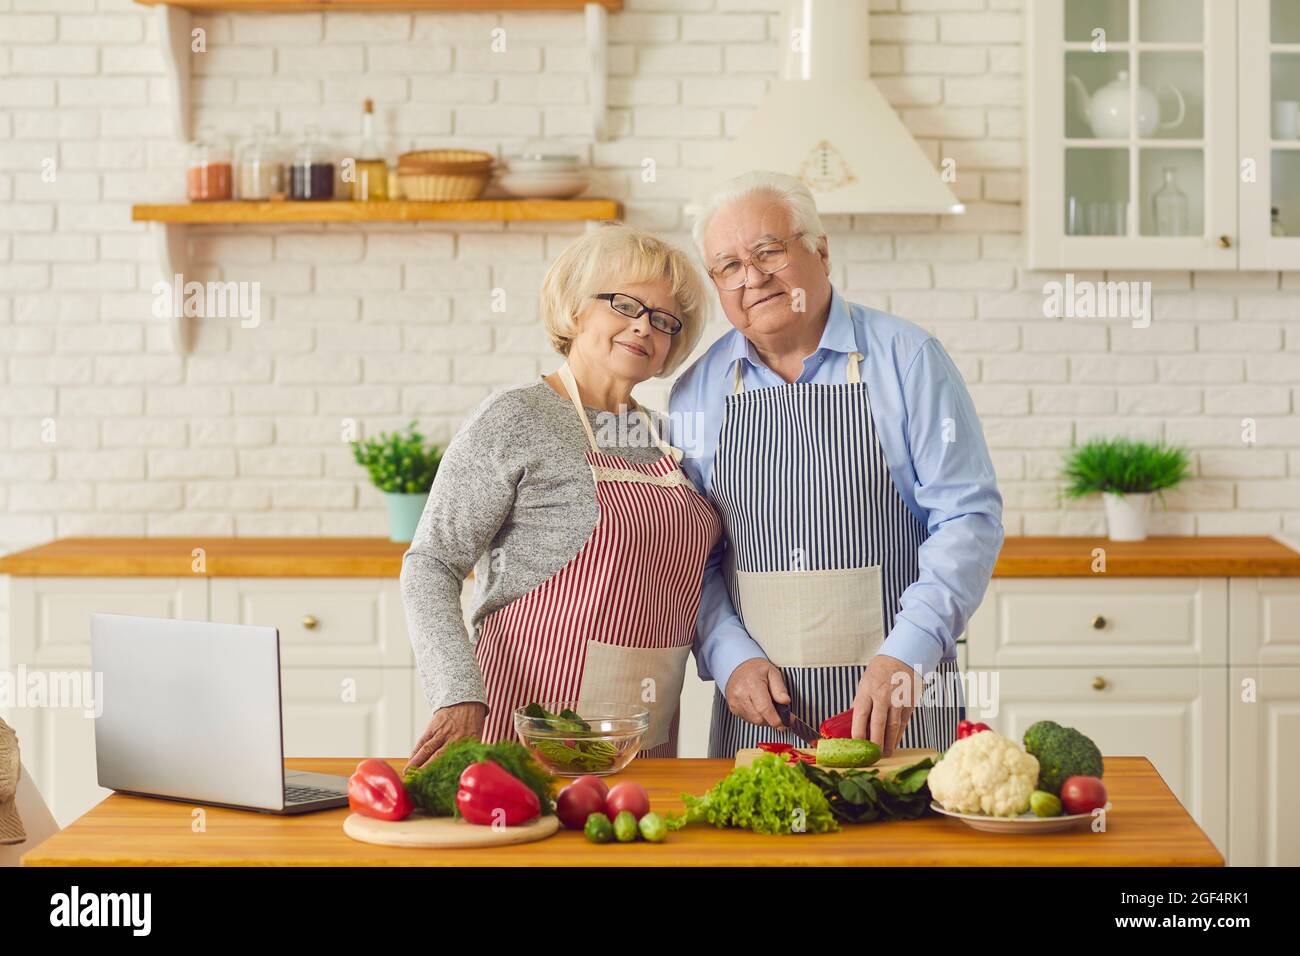 Portrait of a senior couple cooking healthy food at home with organic vegetables. Stock Photo